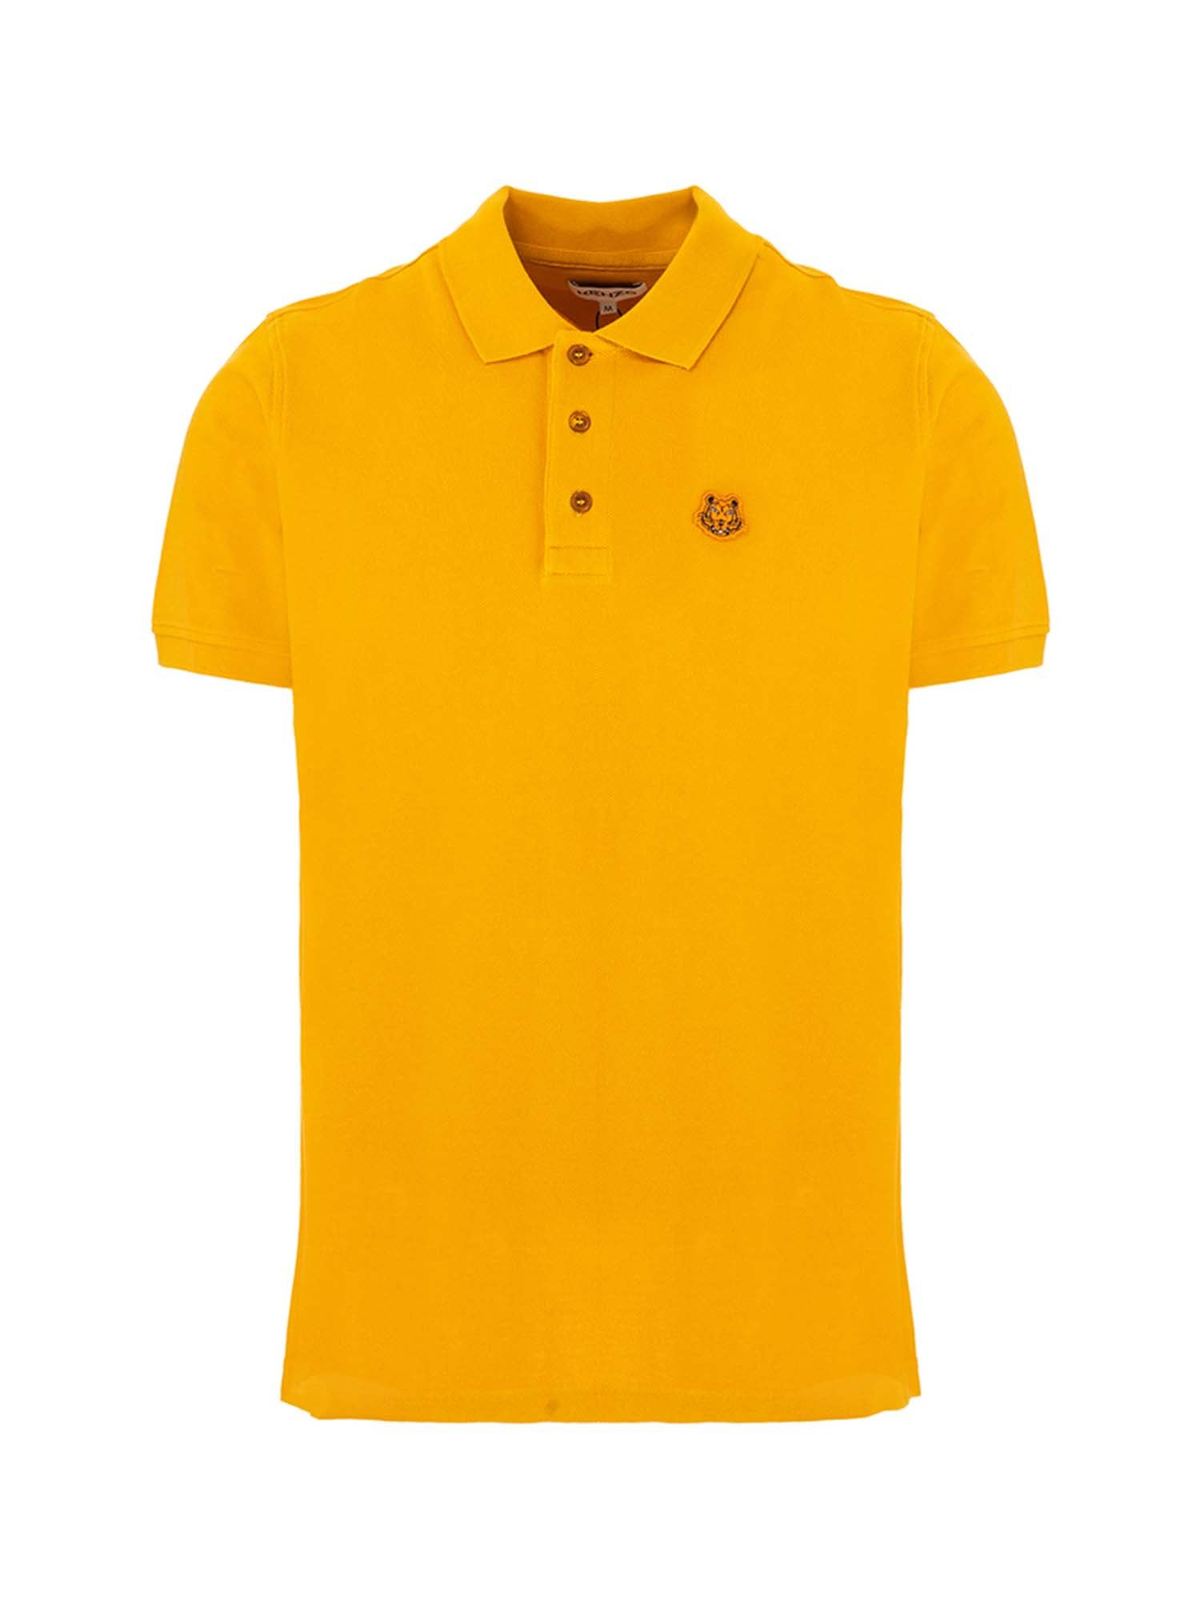 Kenzo - Tiger Crest polo shirt in 